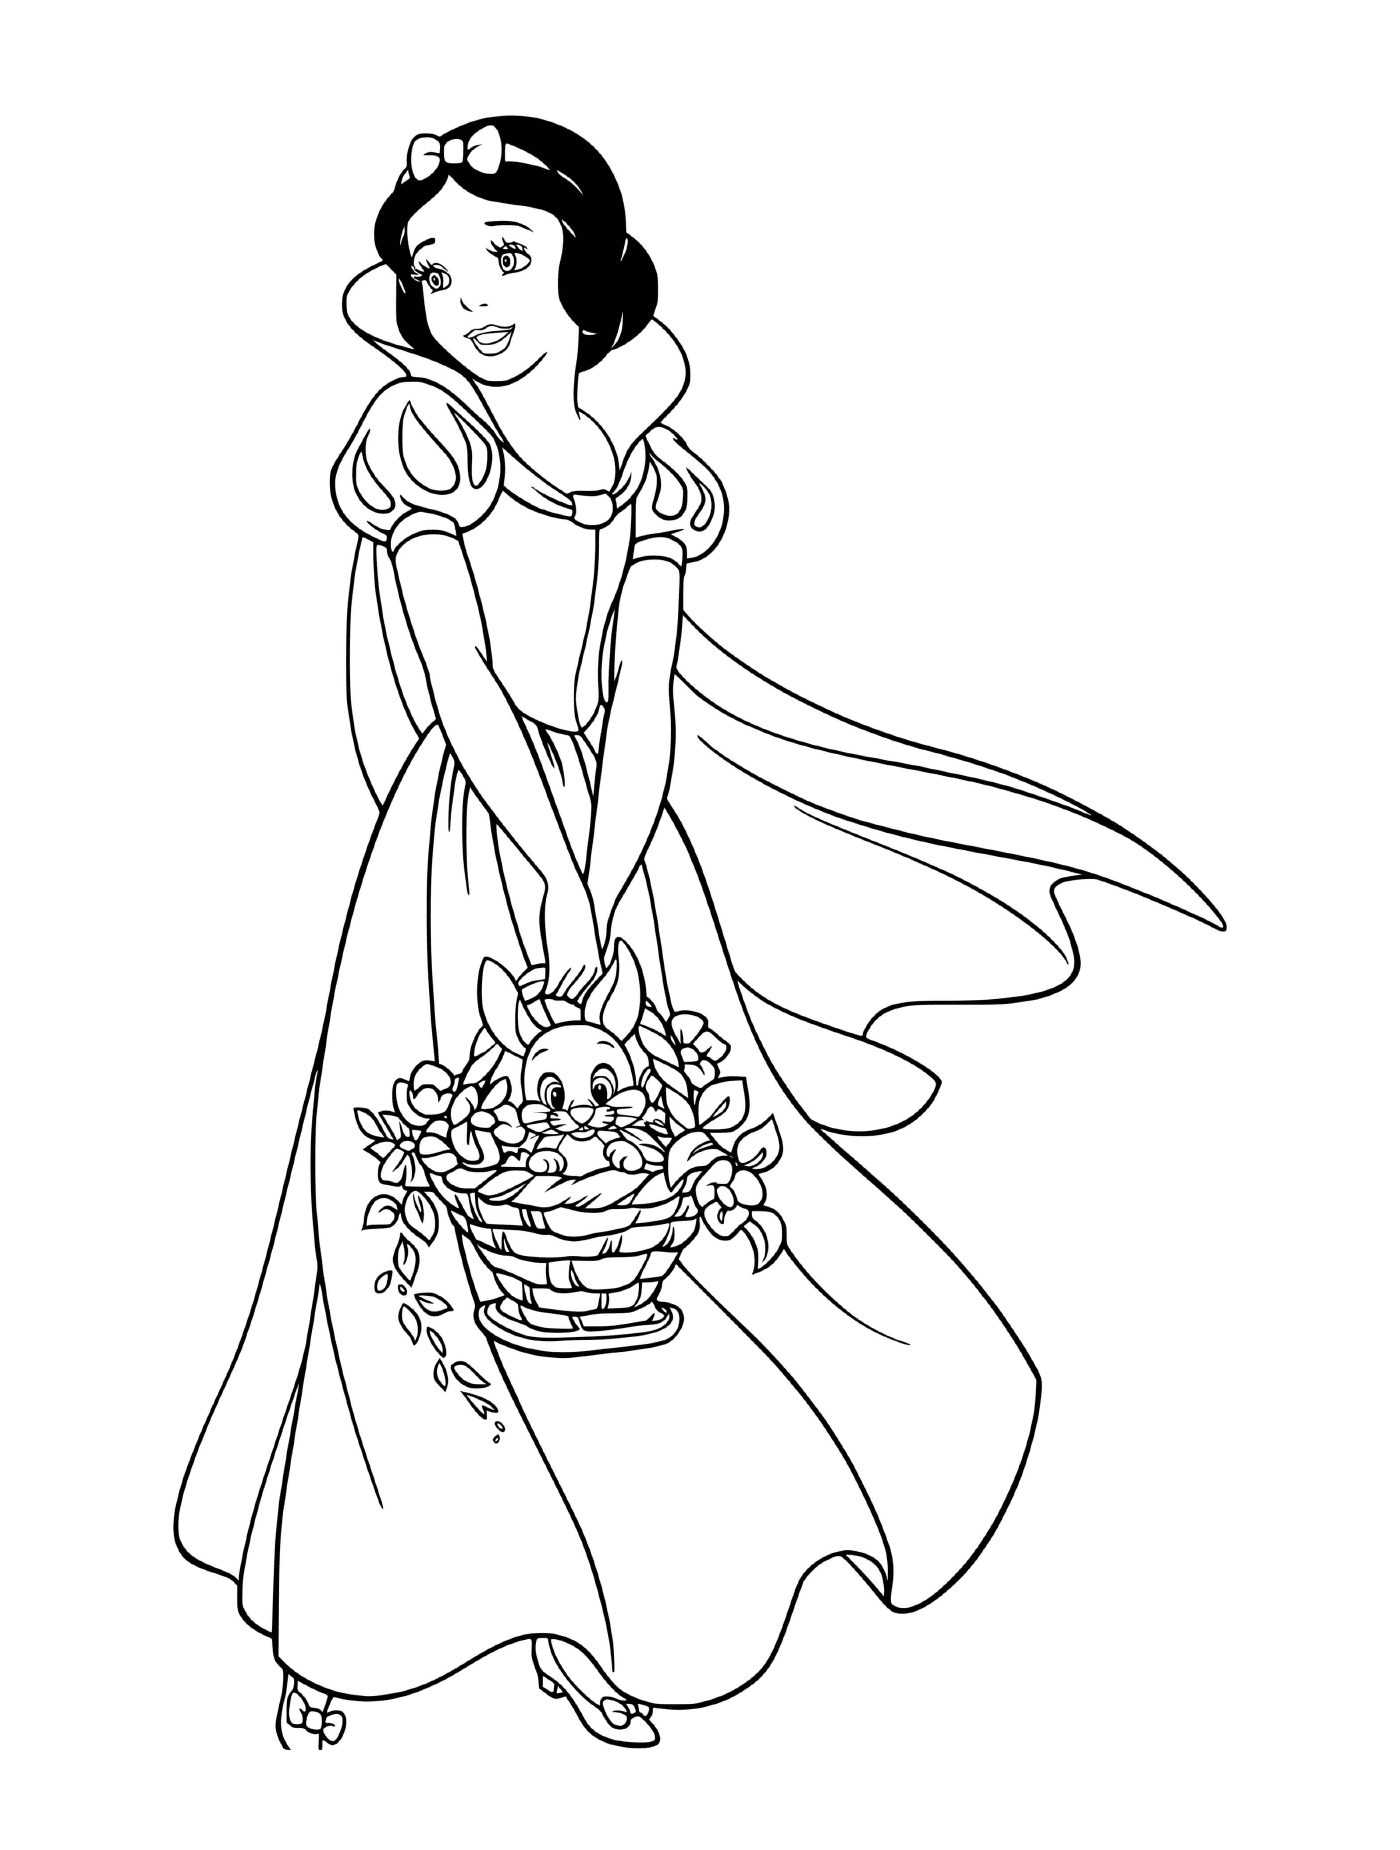  Princess holding a basket of flowers in Snow White 